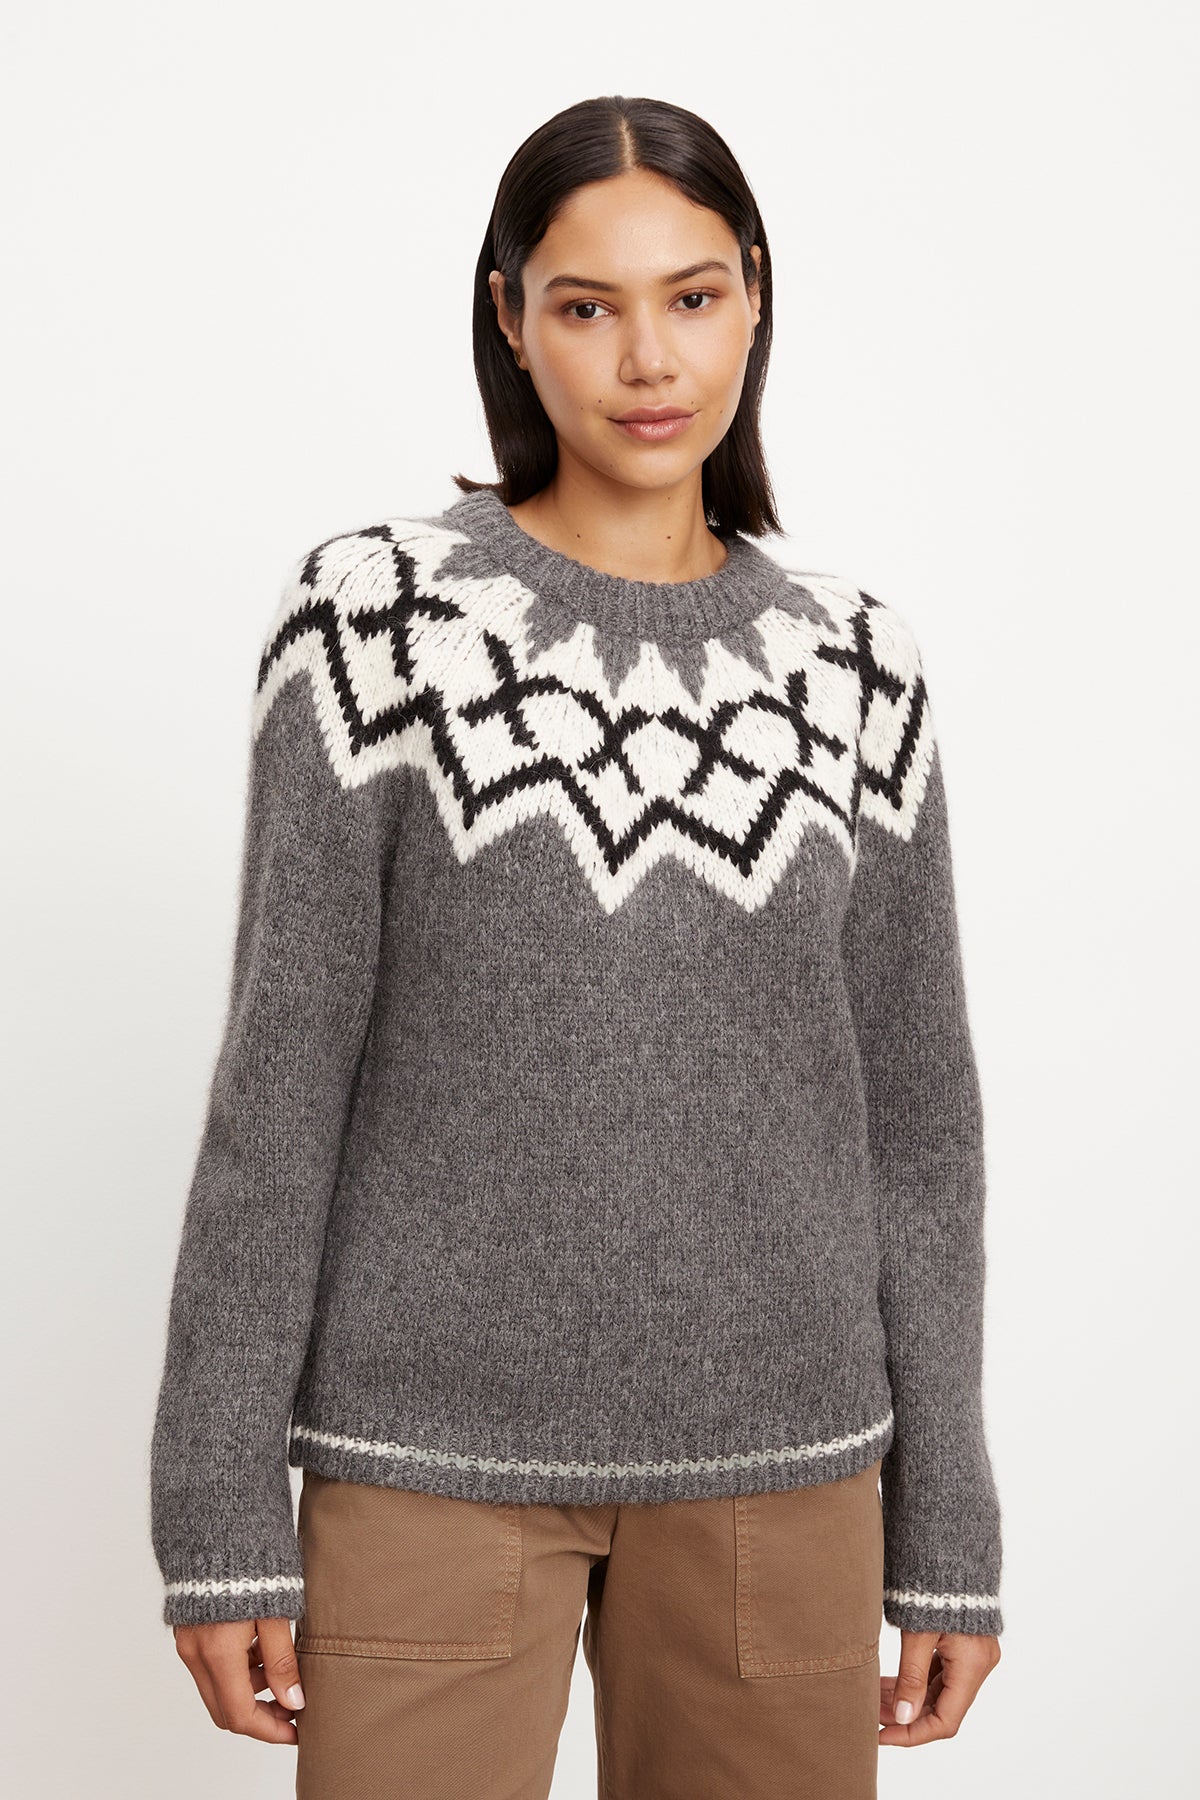 A woman wearing an Alexa Fair Isle Crew Neck sweater by Velvet by Graham & Spencer.-35572030177473